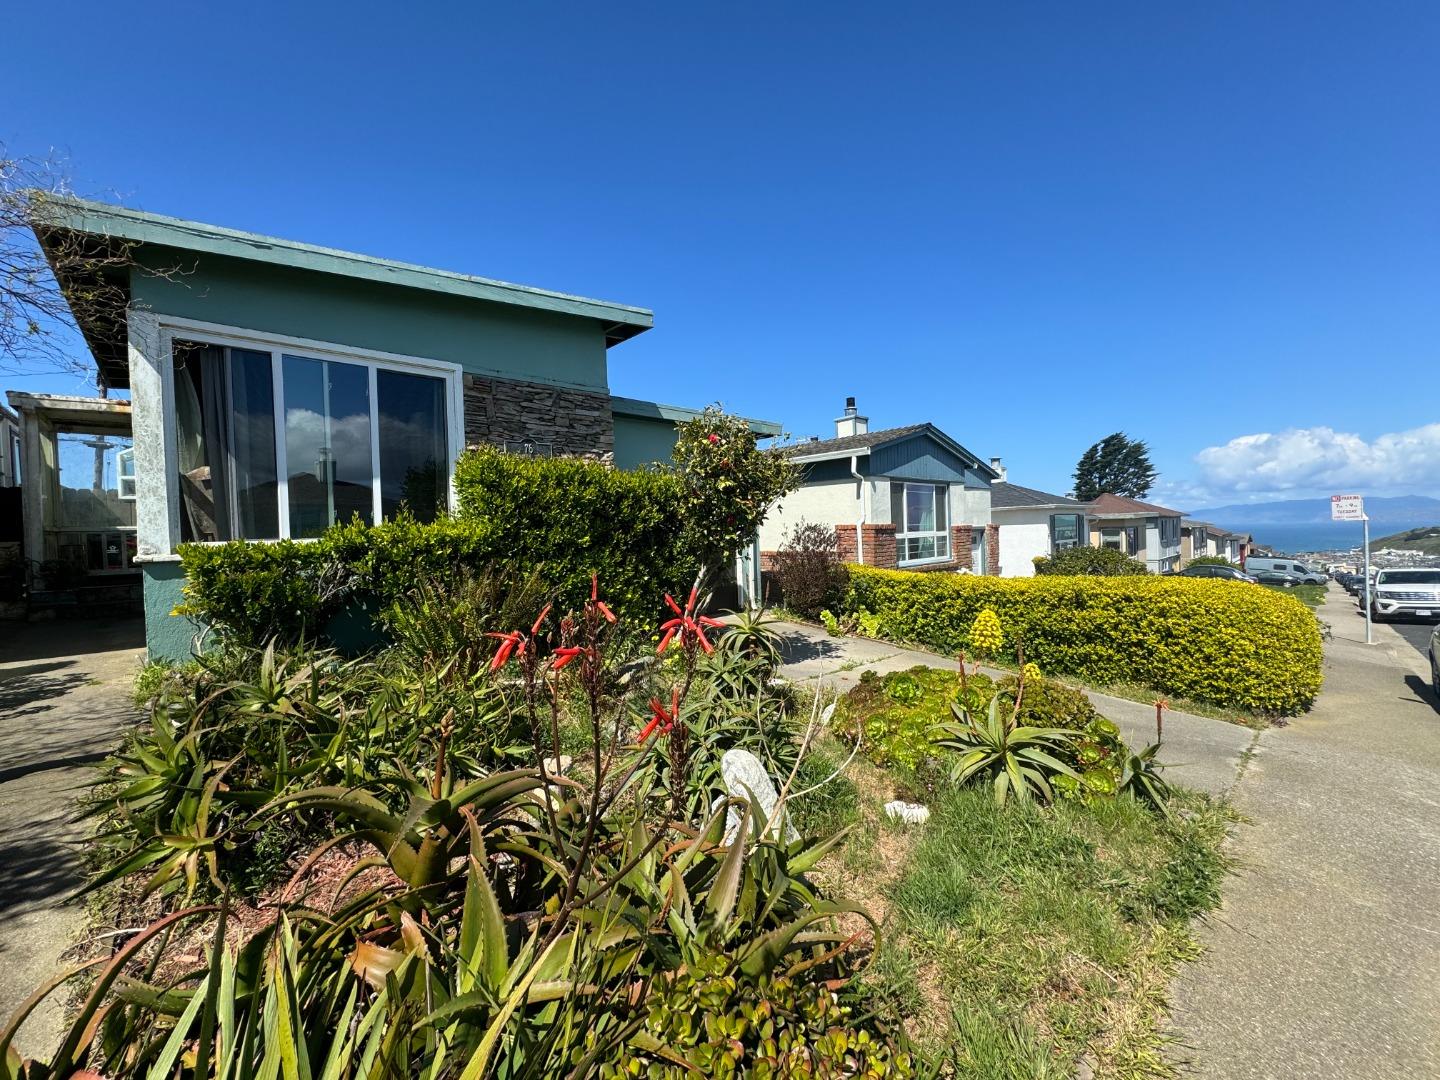 76 Oceanside Drive, Daly City, CA 